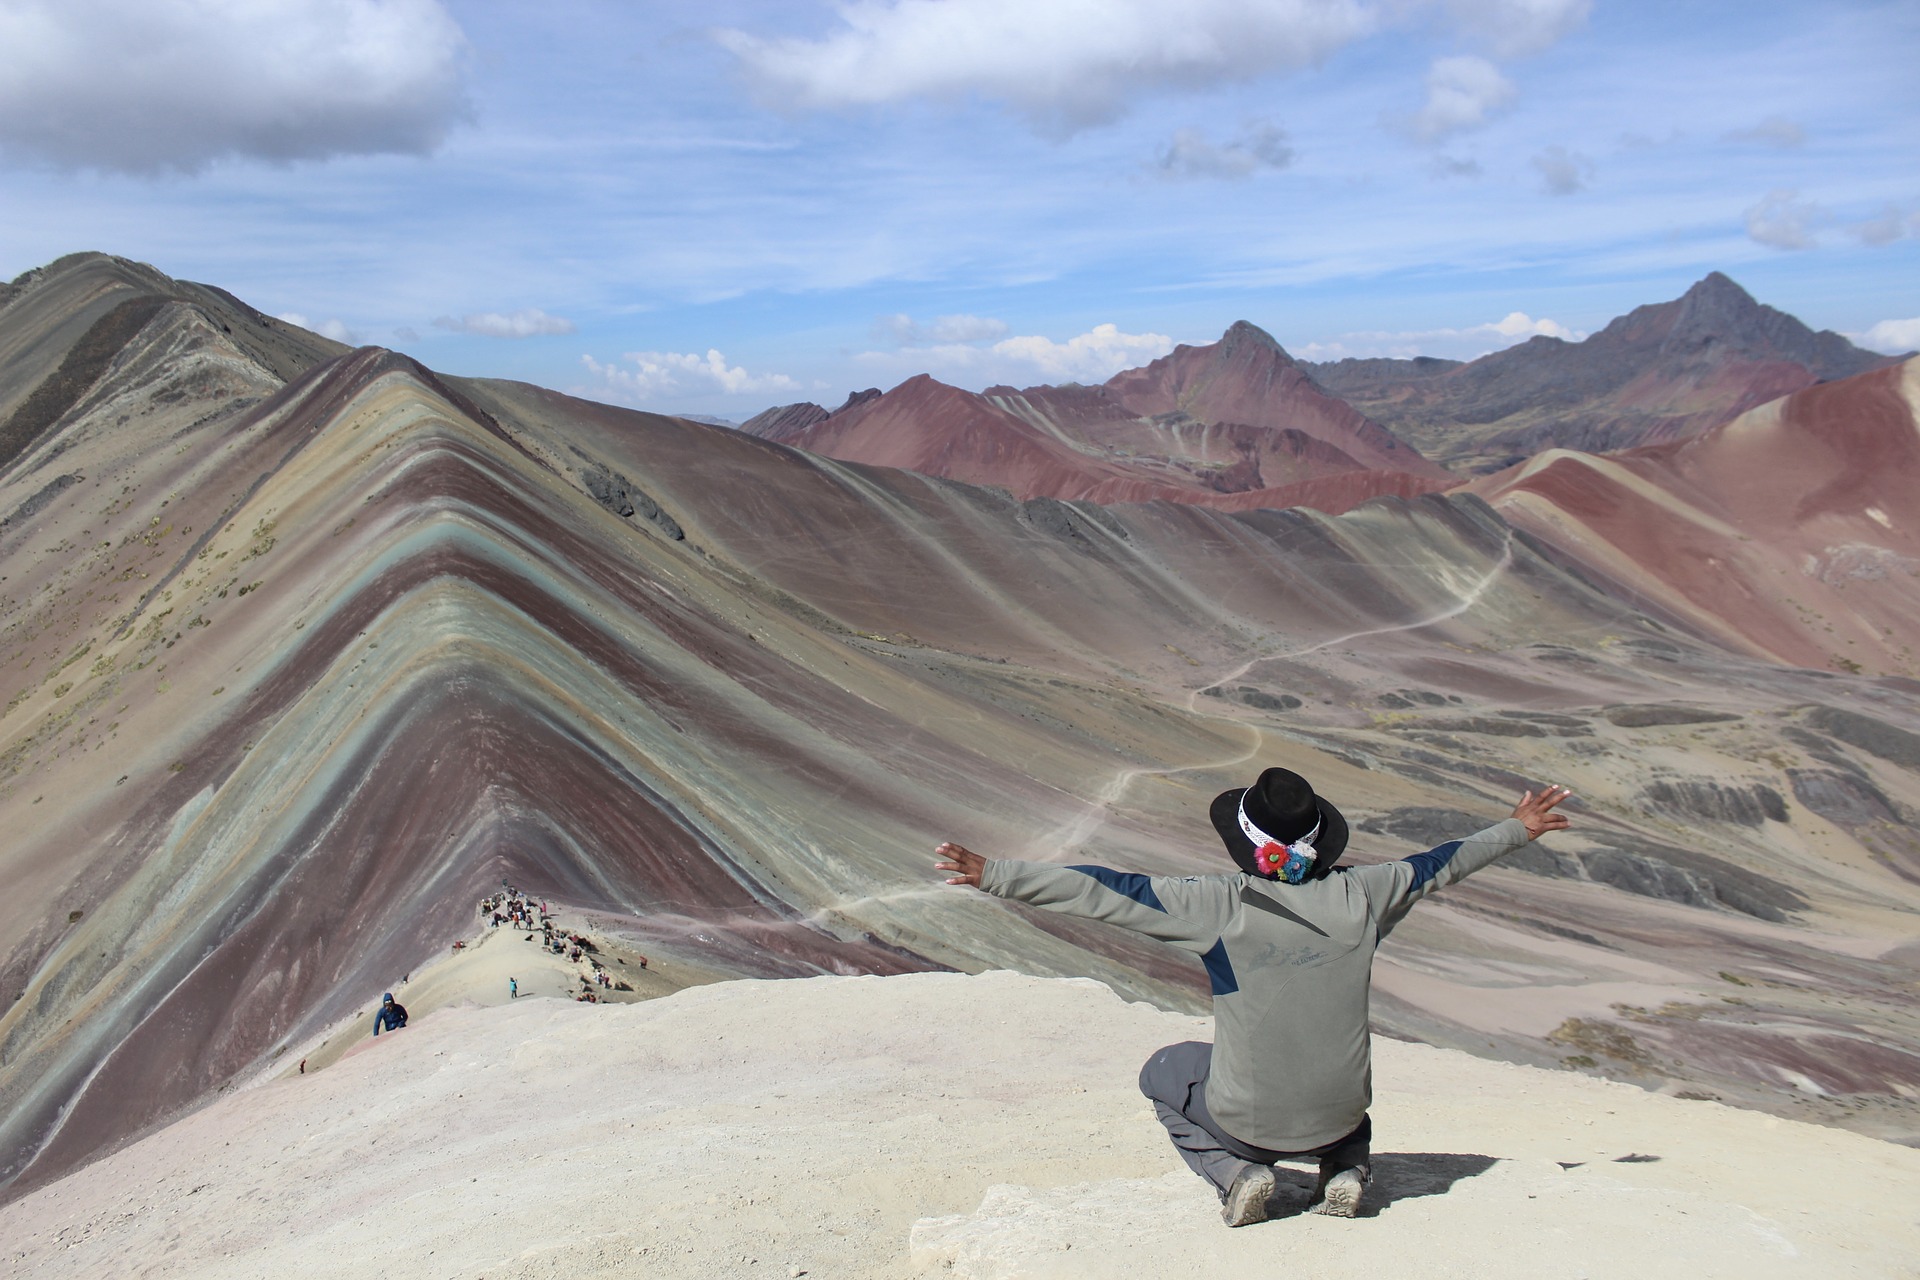 THE RAINBOW MOUNTAIN OR 7 COLOR, 2 DAYS TREKKING - South America Planet